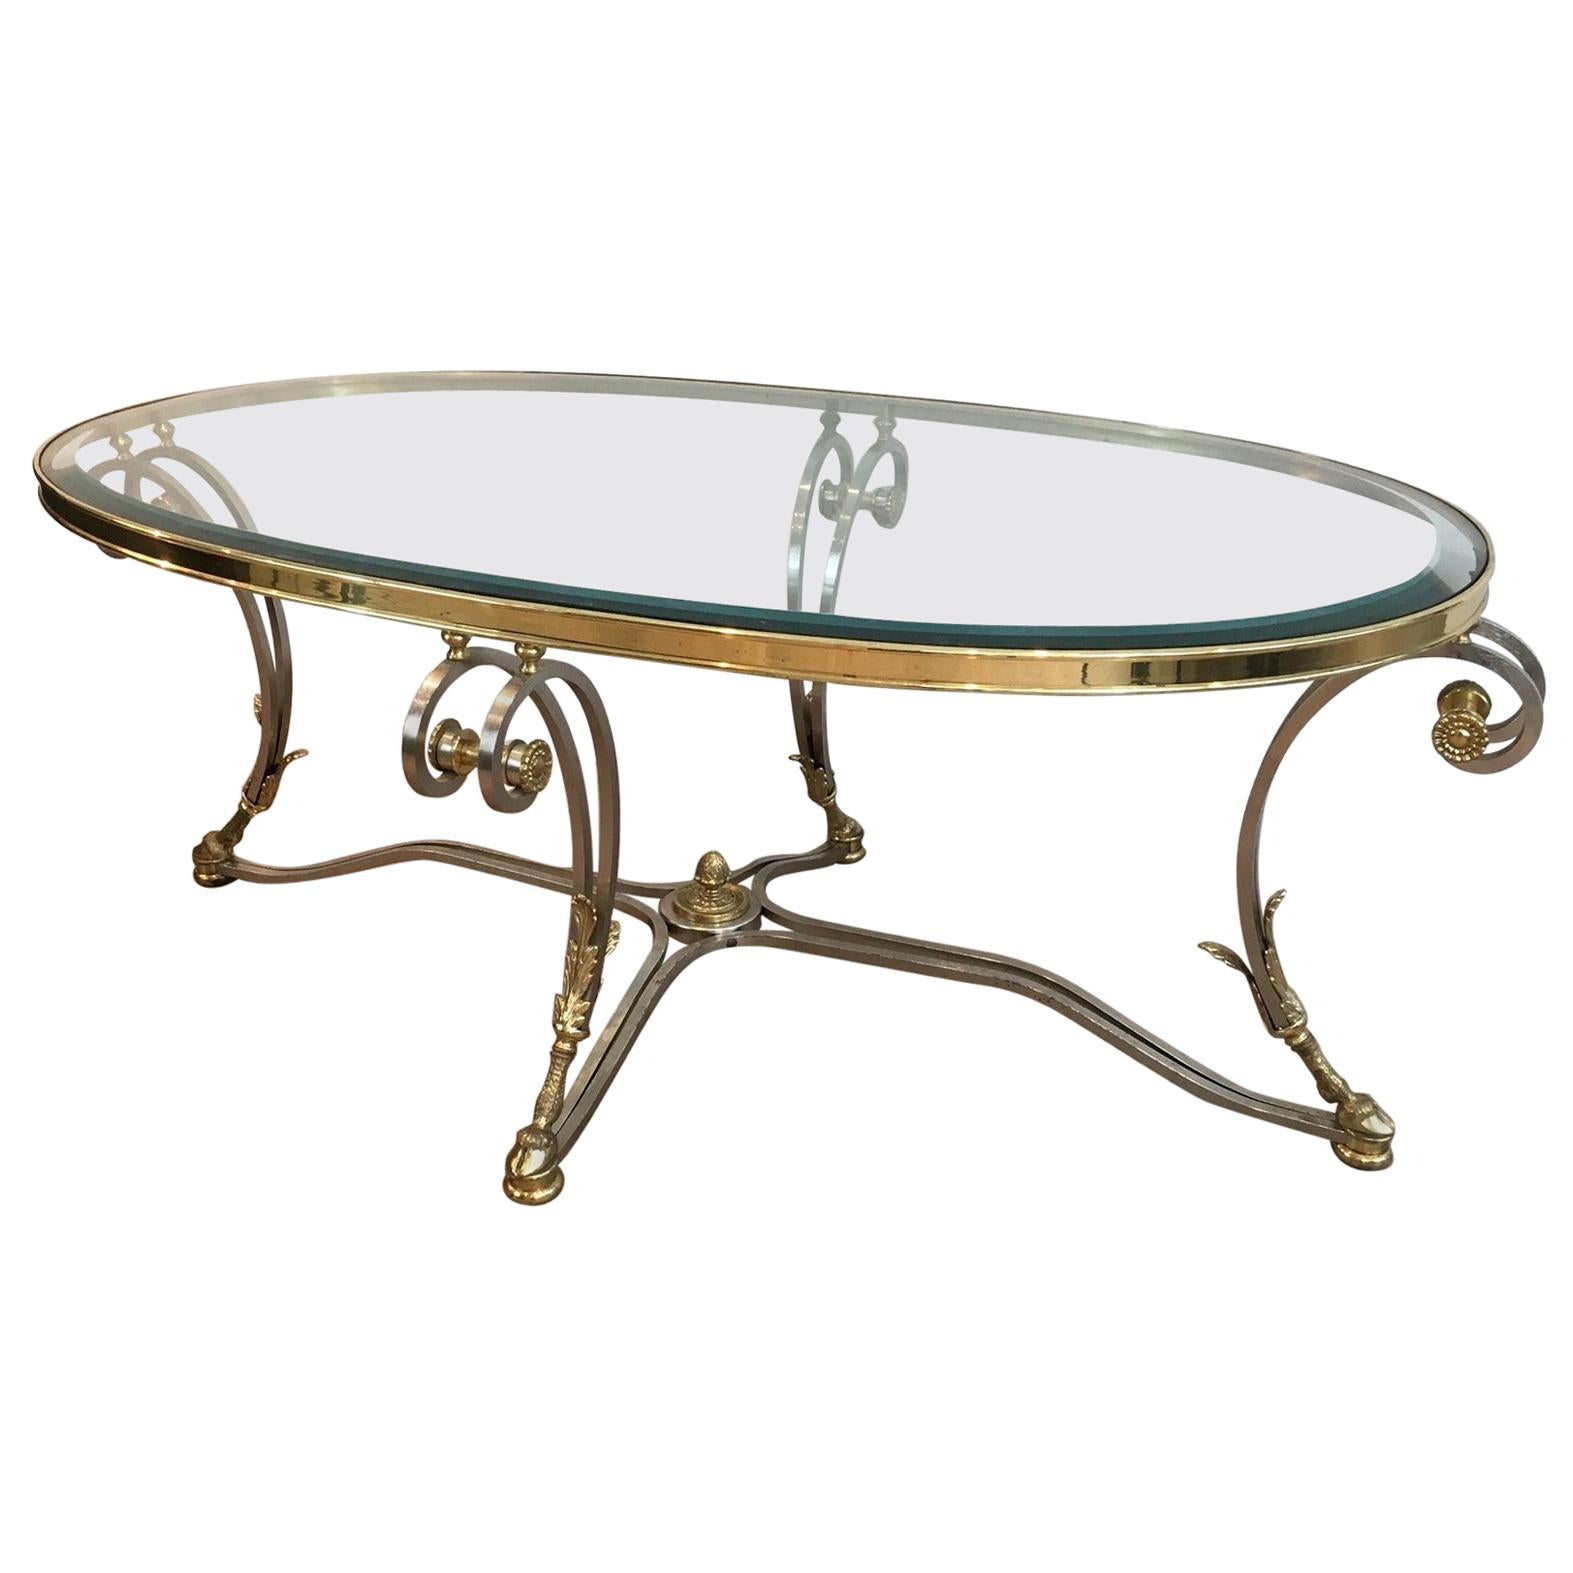 Beautiful Neoclassical Style Oval Brushed Steel & Brass Coffee Table. Circa 1970